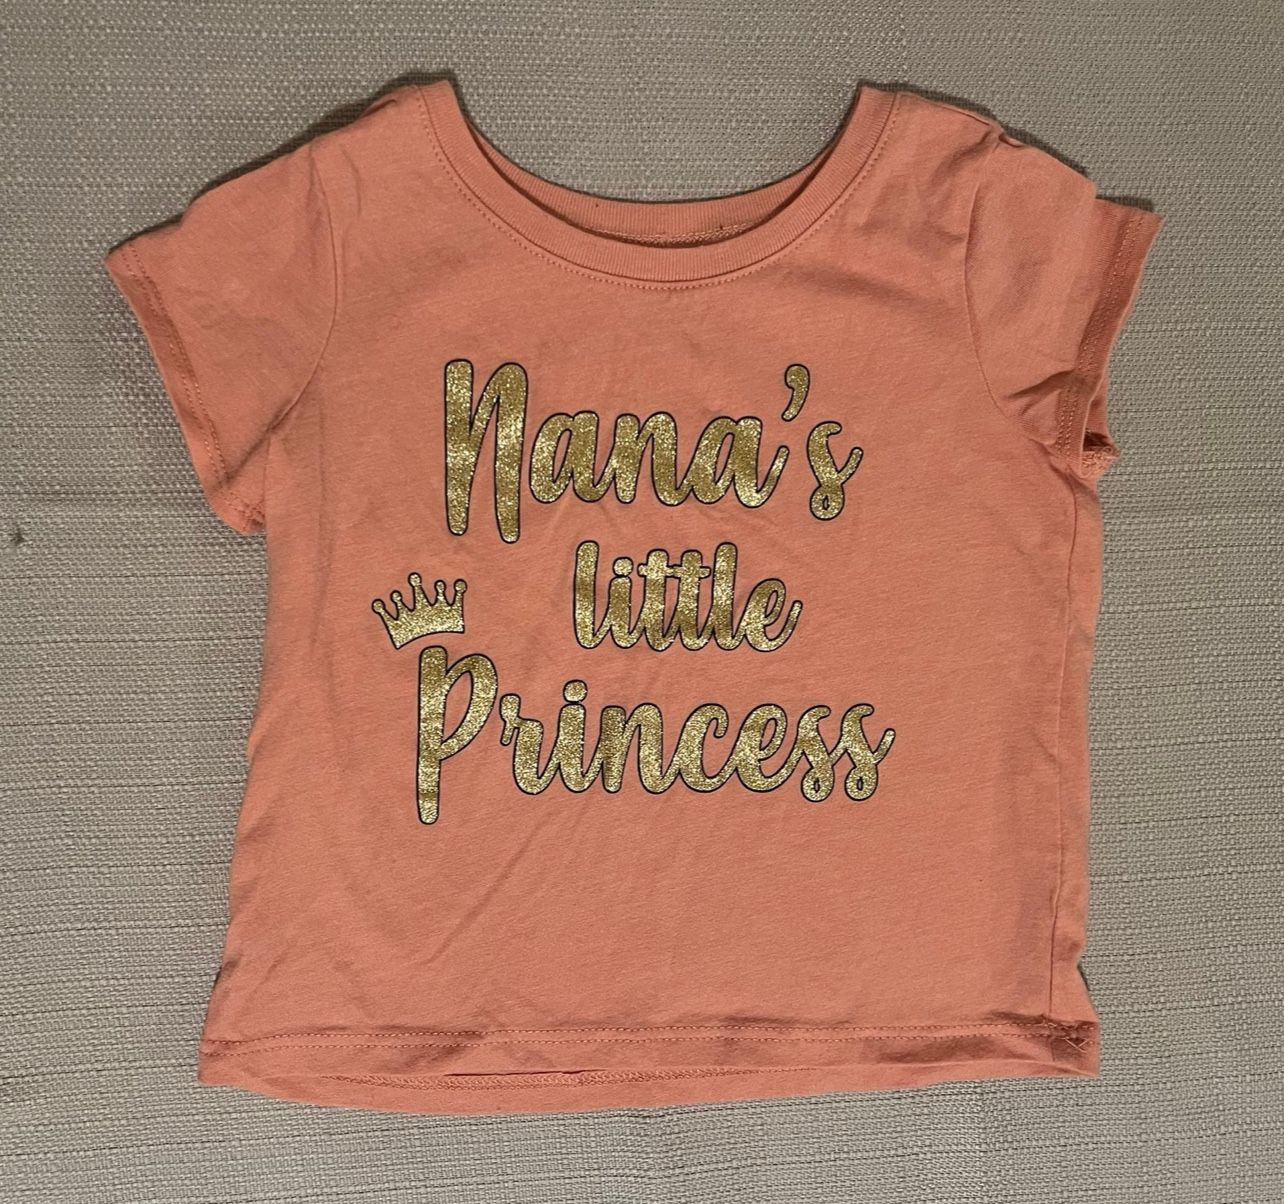 Children’s Place “Mama’s Little Princess” Tee  Size 18-24 Months